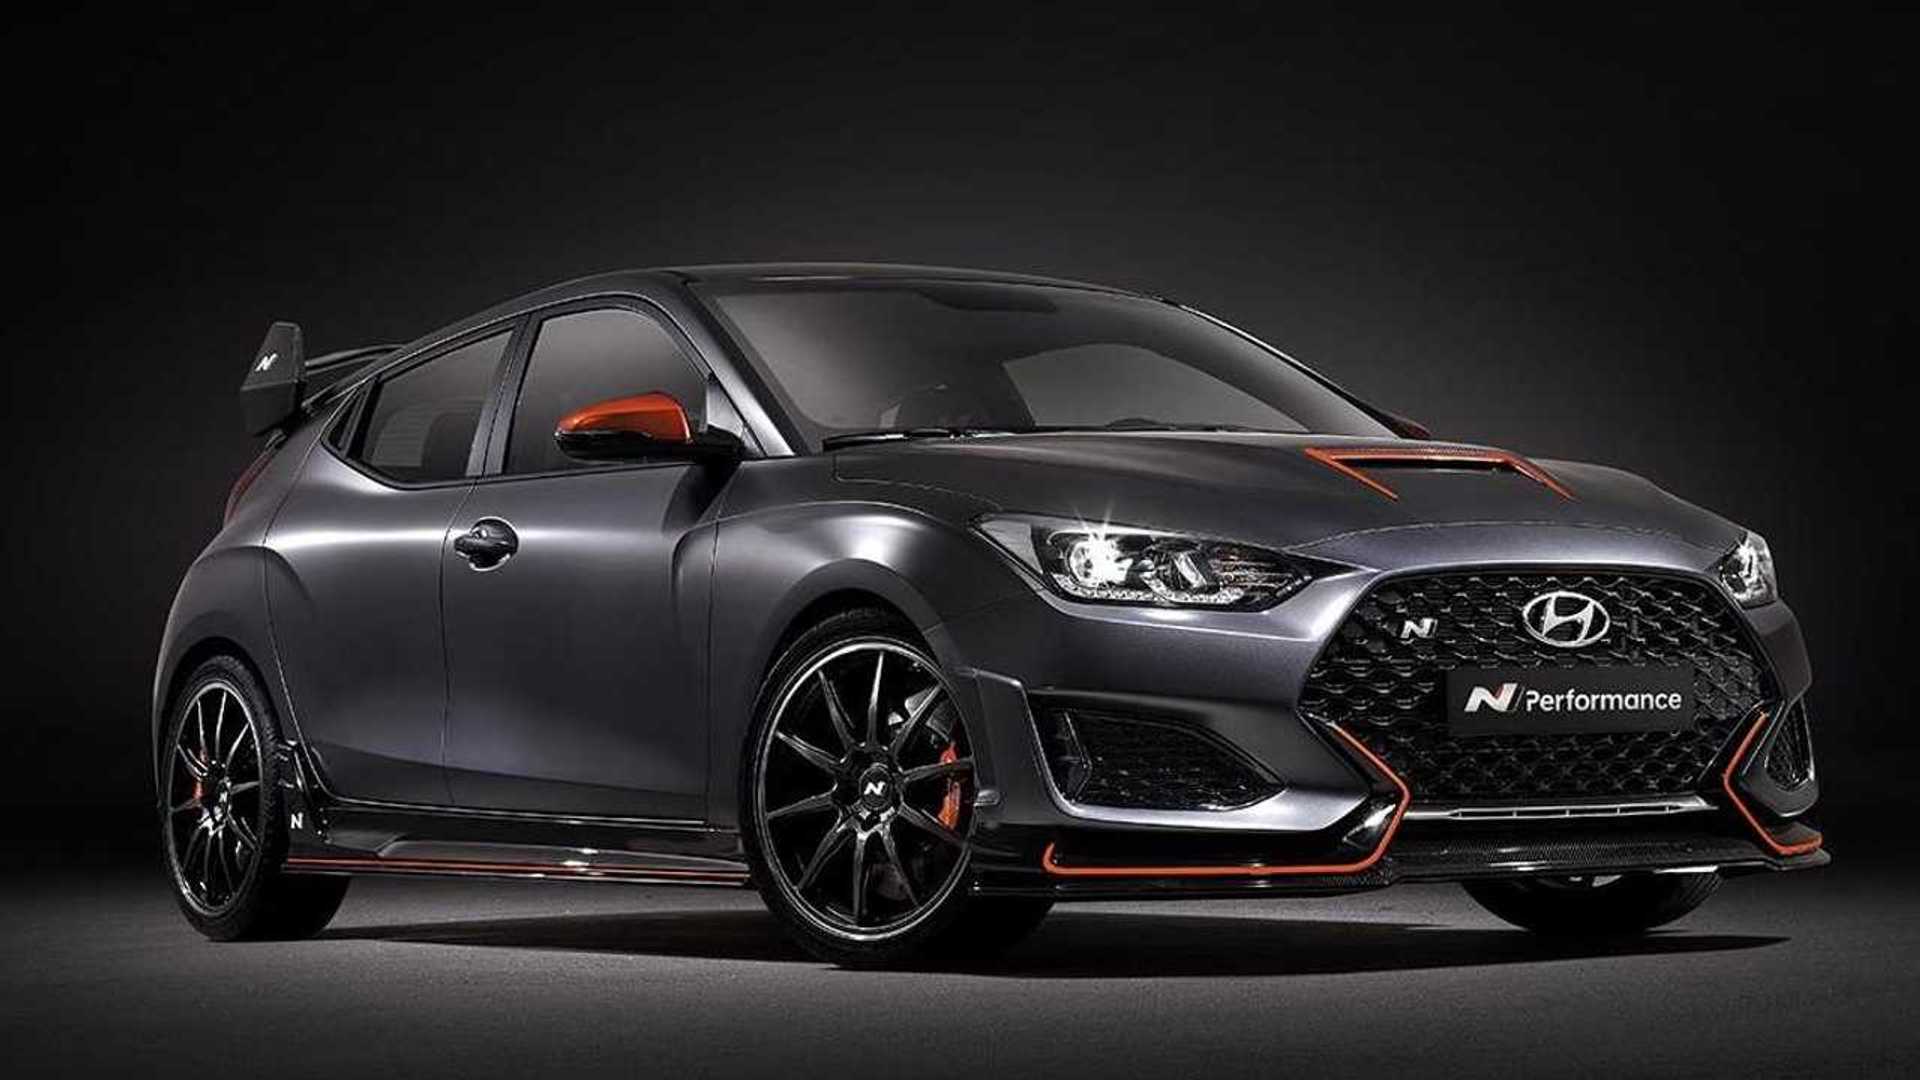 Hyundai Veloster N Performance Concept Coming To SEMA Show